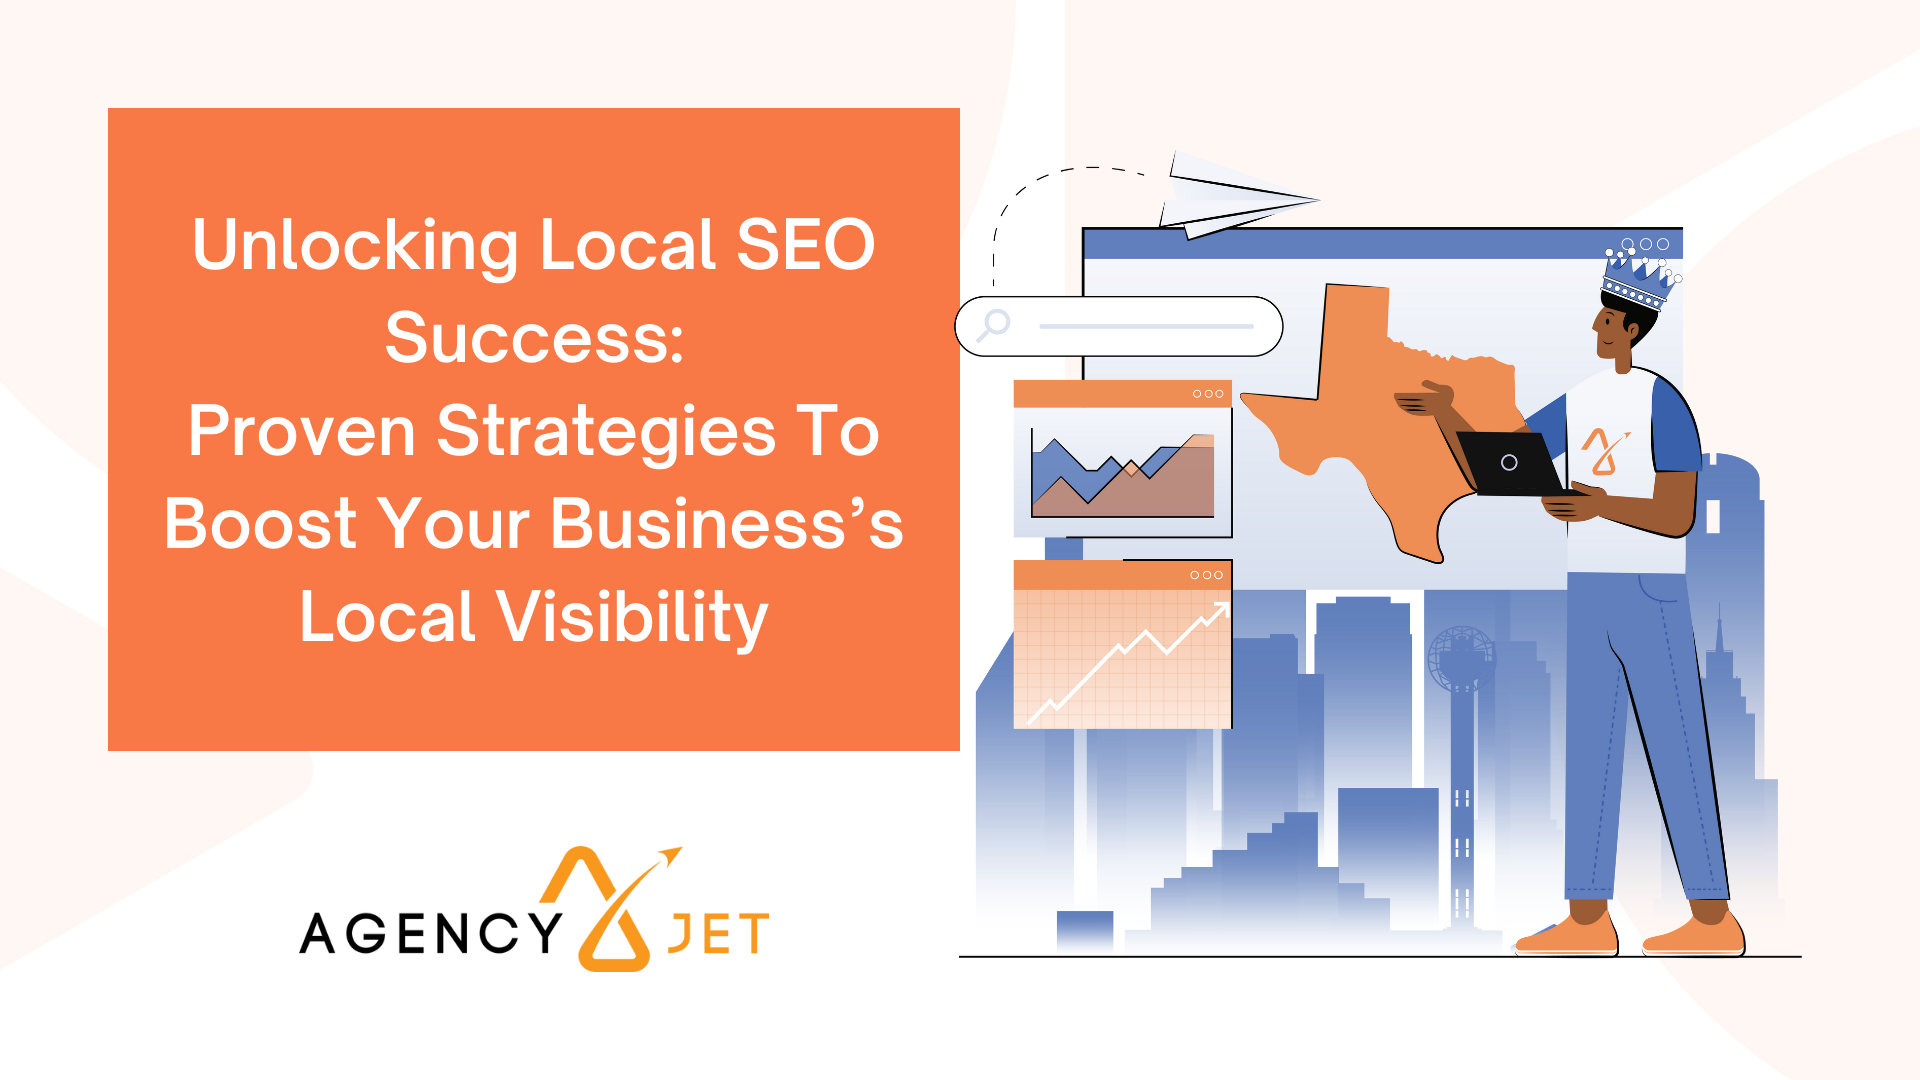 Local SEO Citation Building Strategies: Boost Your Online Visibility